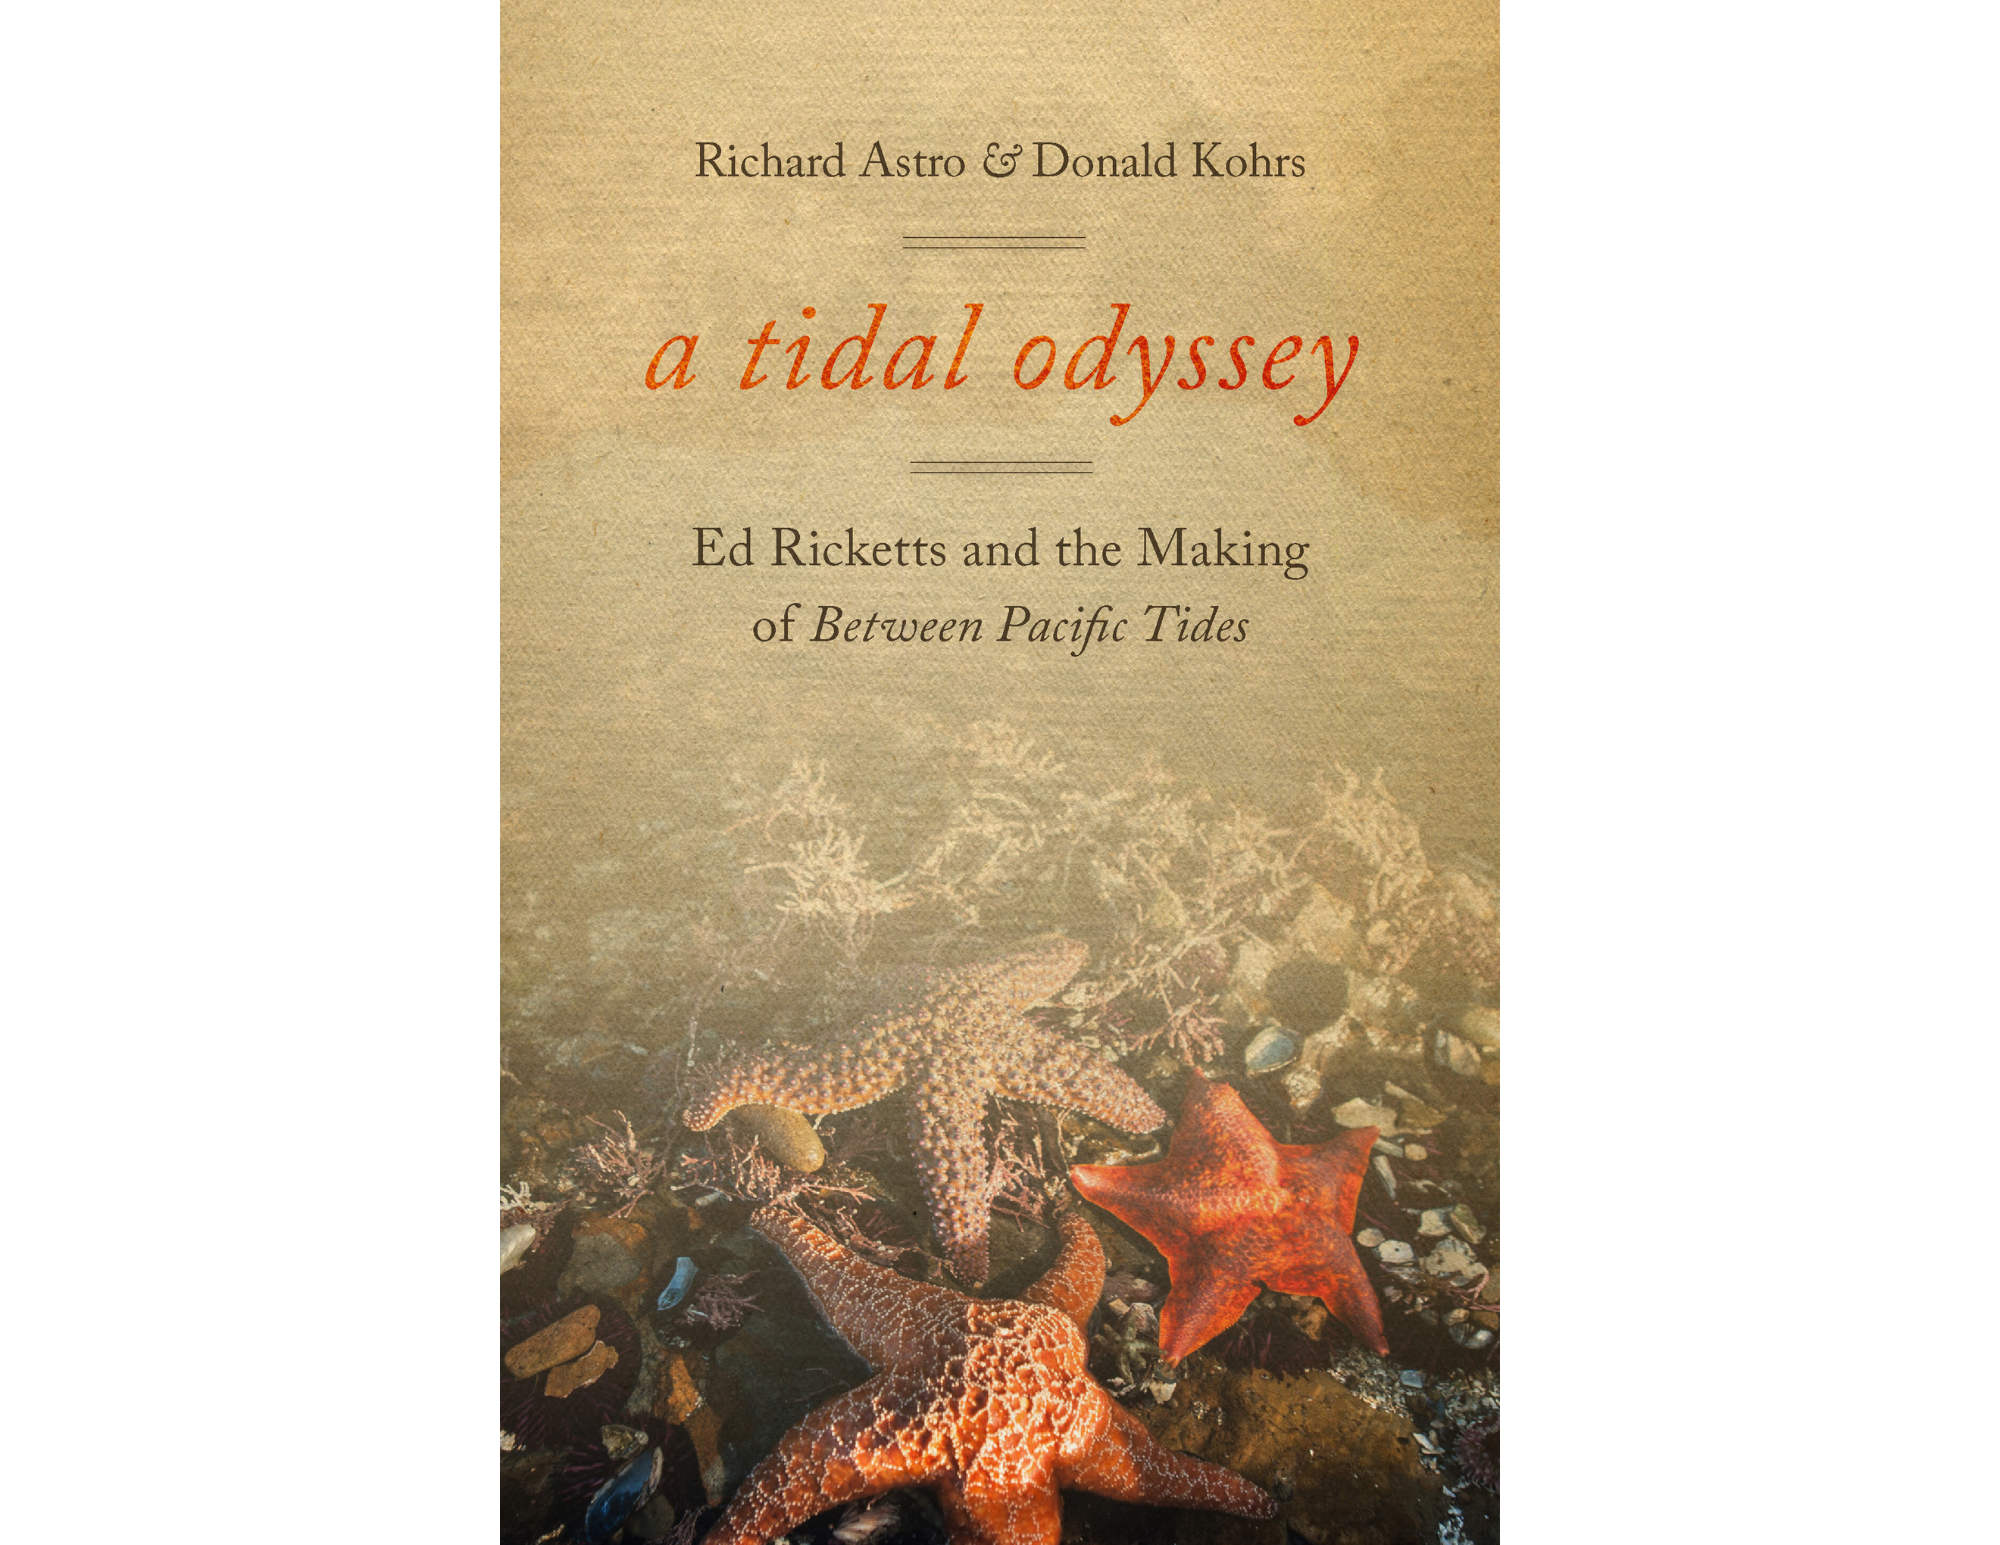 An Eminently Readable Tidal Odyssey